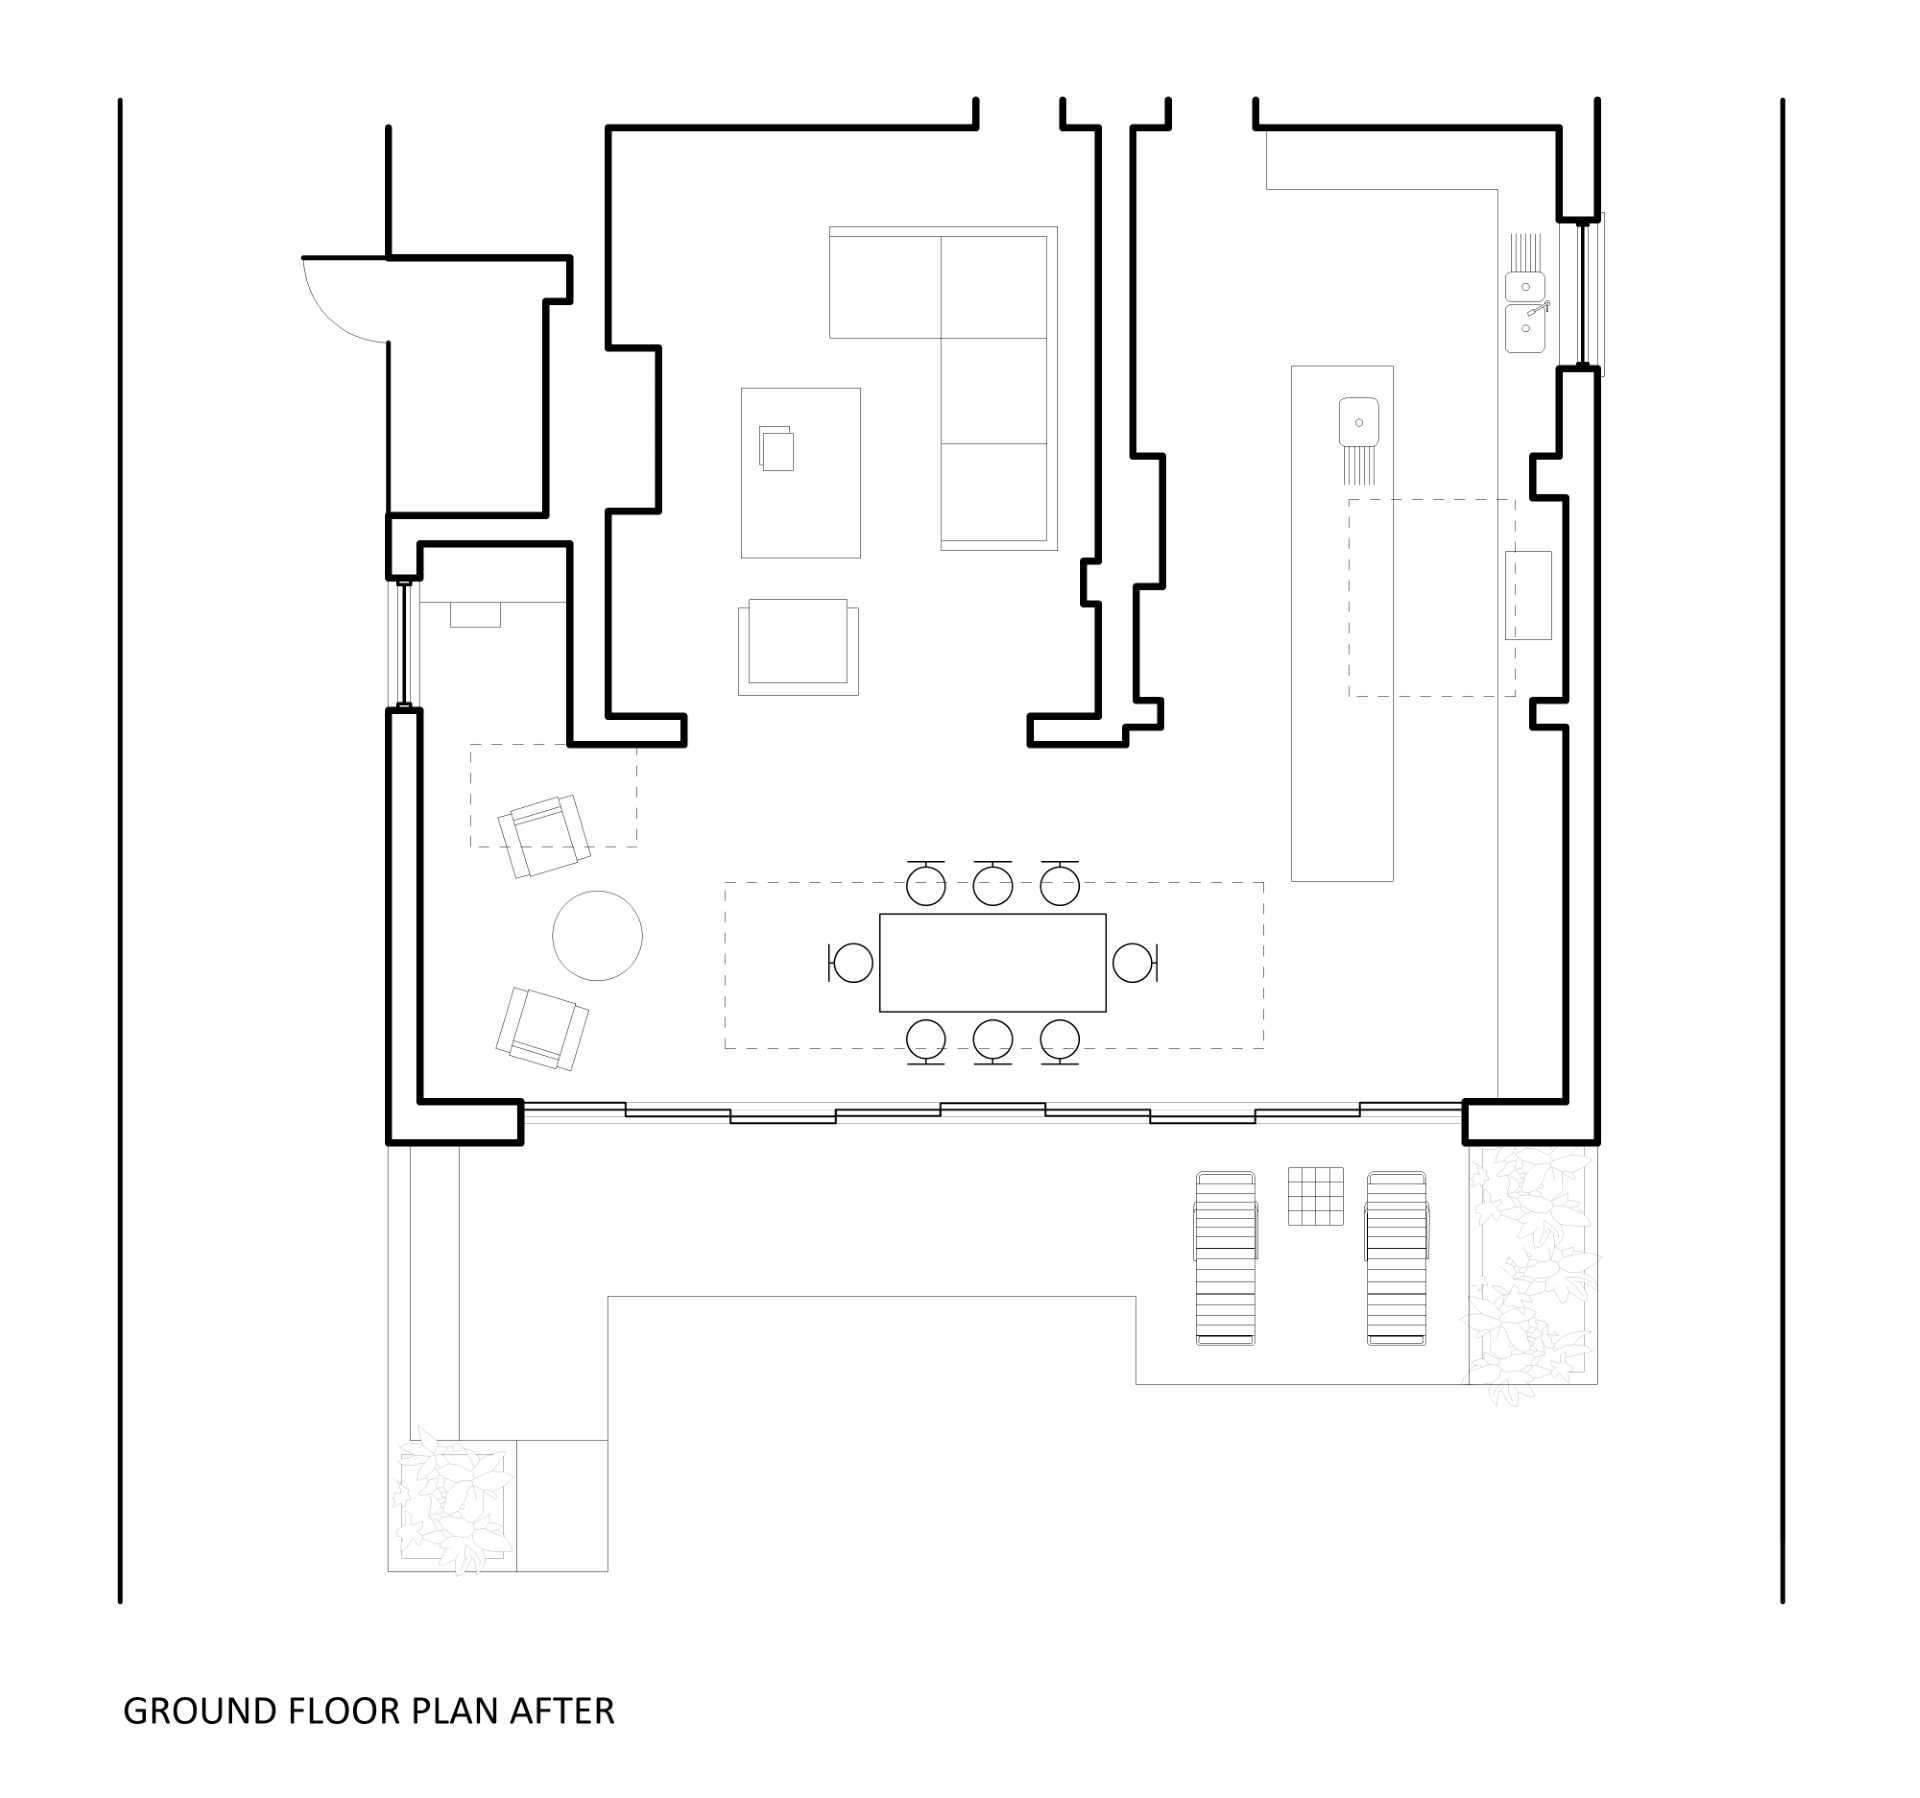 The floor plan of a new addition.